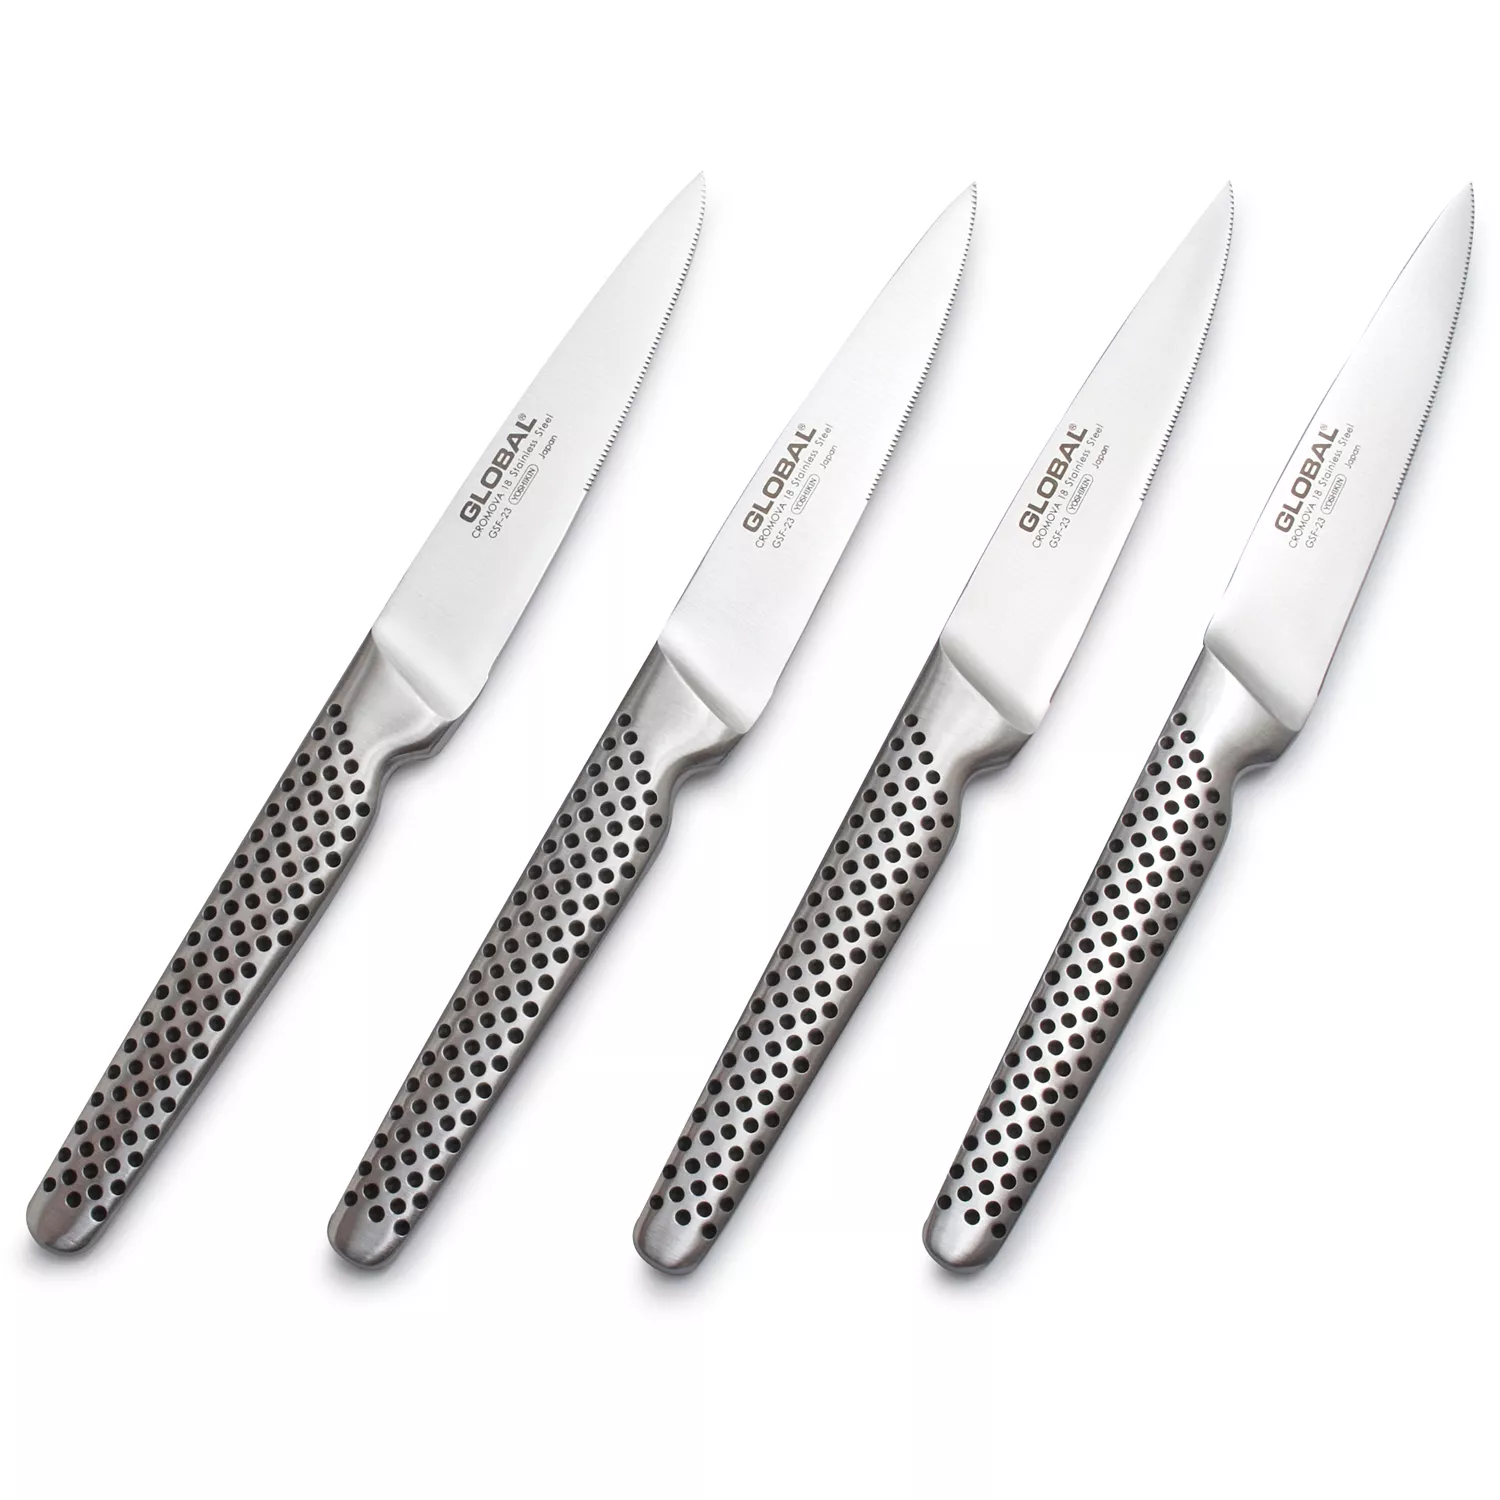 Global Accessories G-88/4001 4 Piece Steak Knife Set with Dock